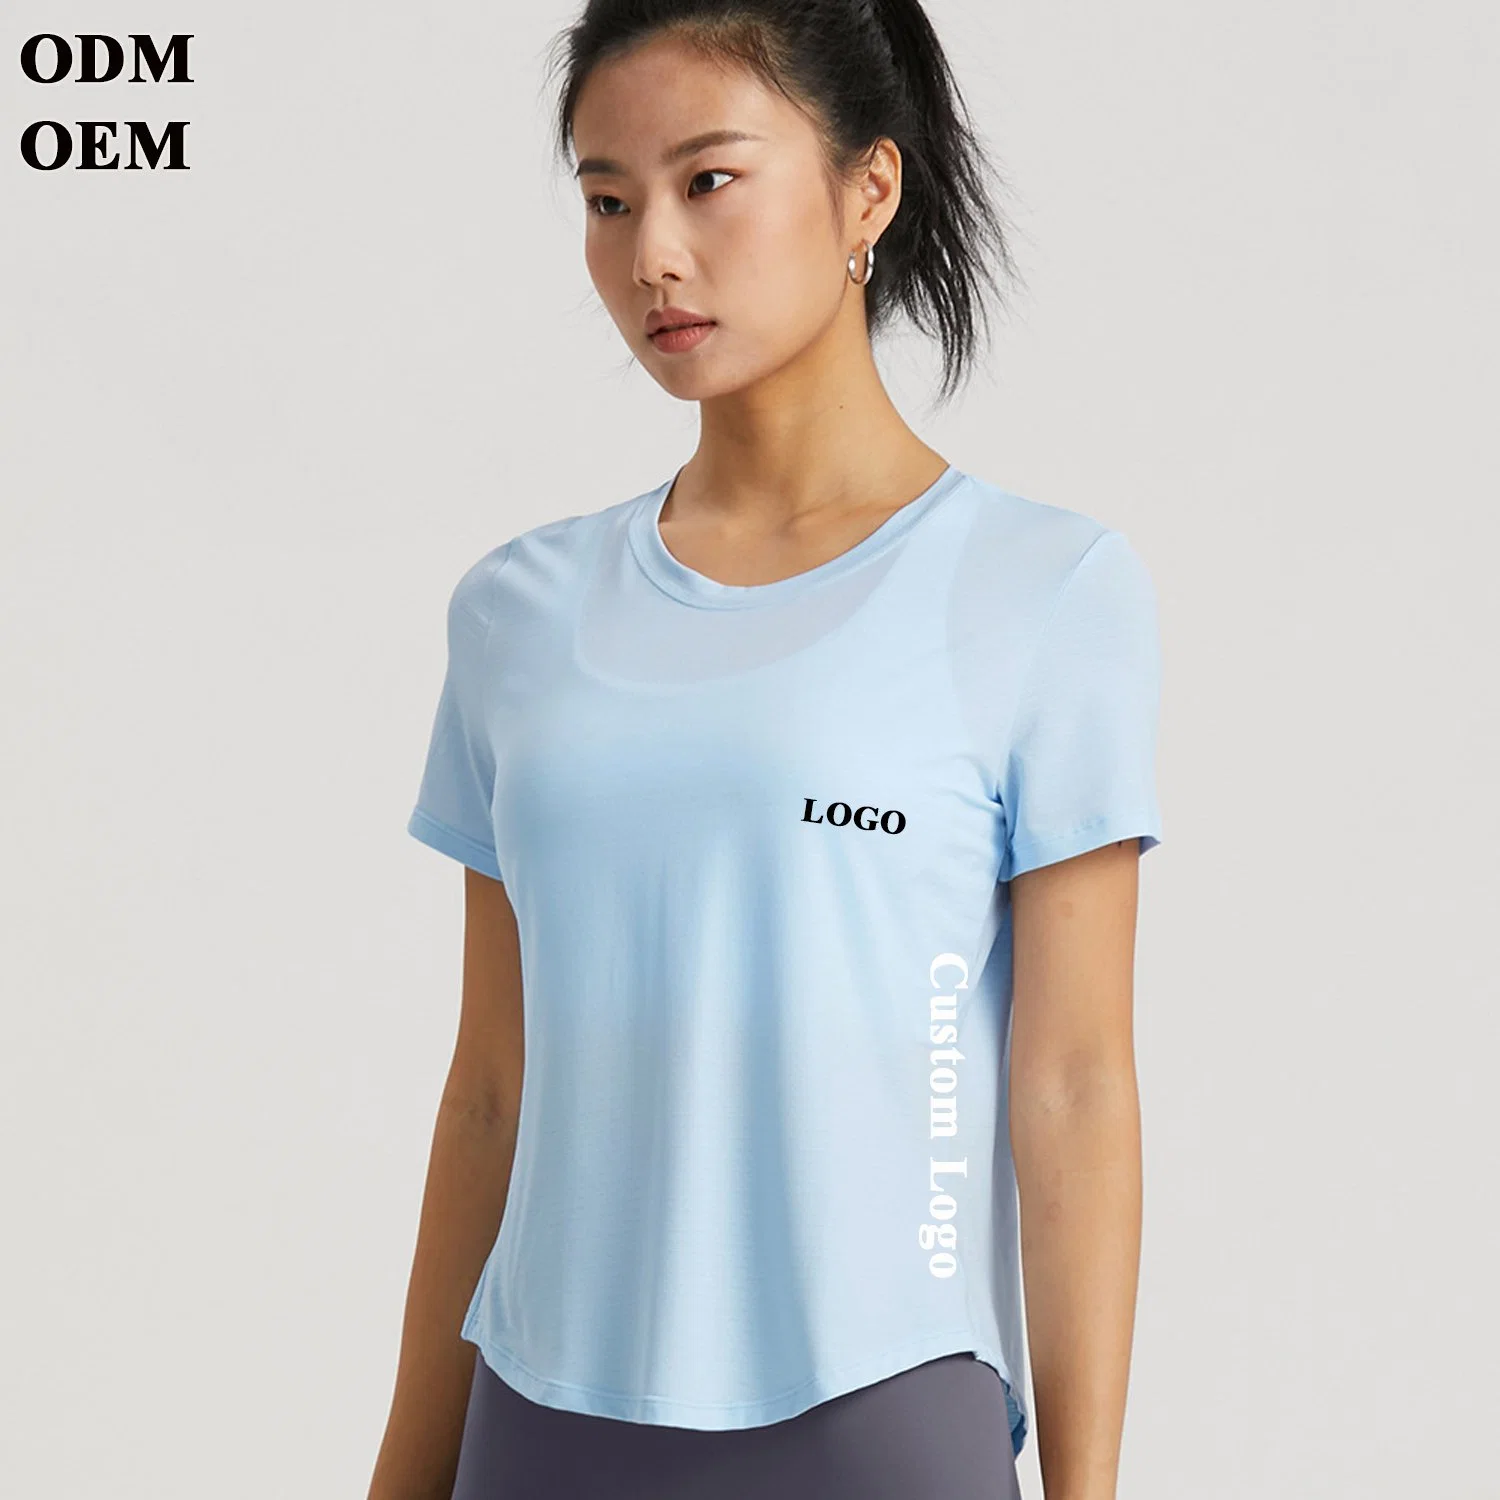 Patchwork Yoga Sport T-Shirt Women Loose Fit O-Neck Workout Running Tee Tops Fitness Short-Sleeved Shirts